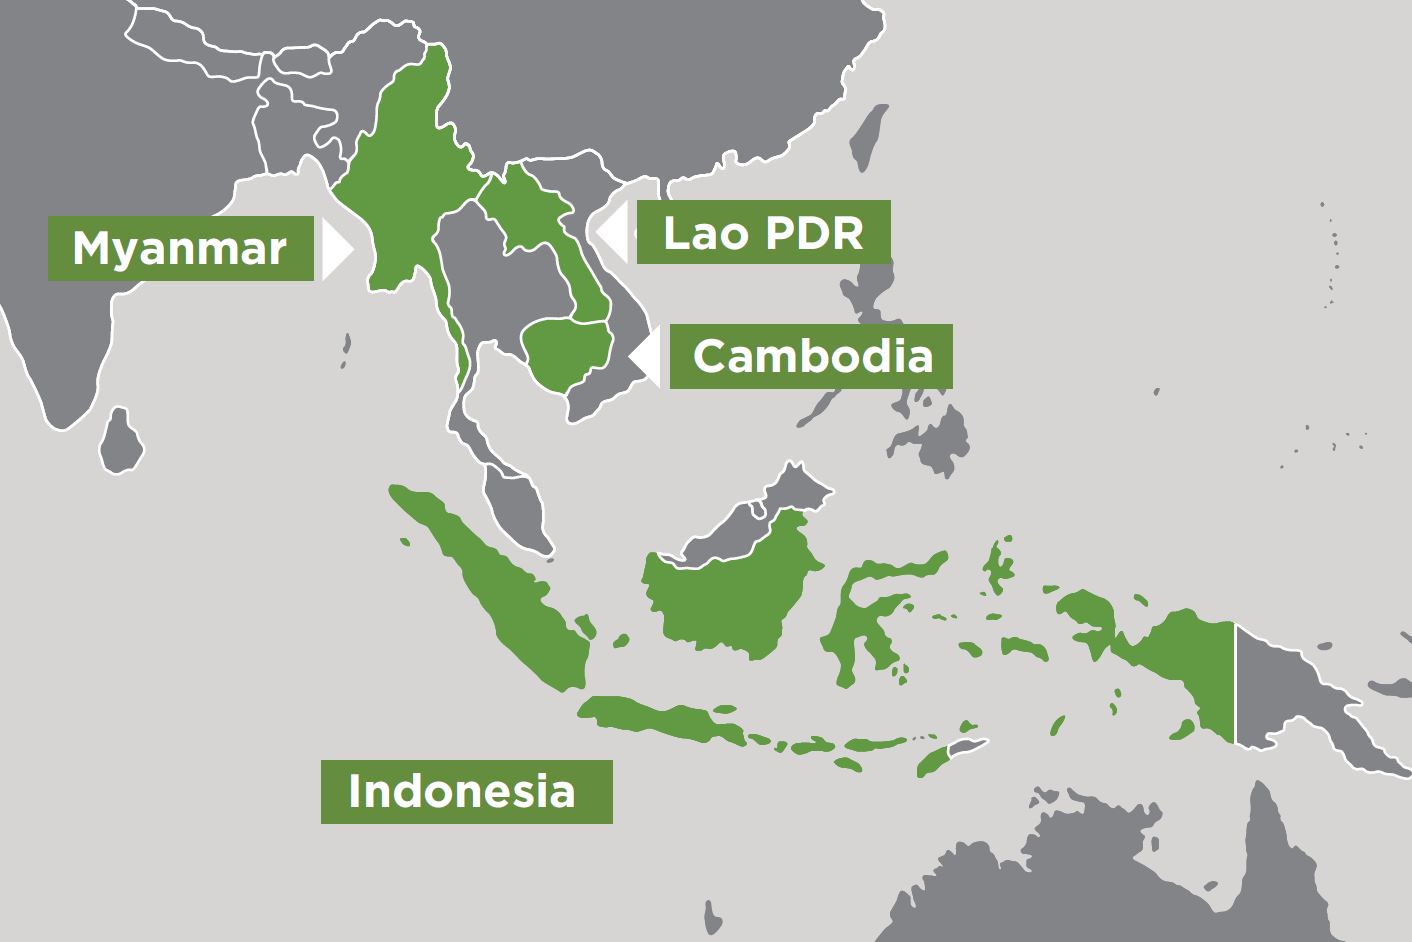 Map of Cambodia, Indonesia, Laos and Myanmar